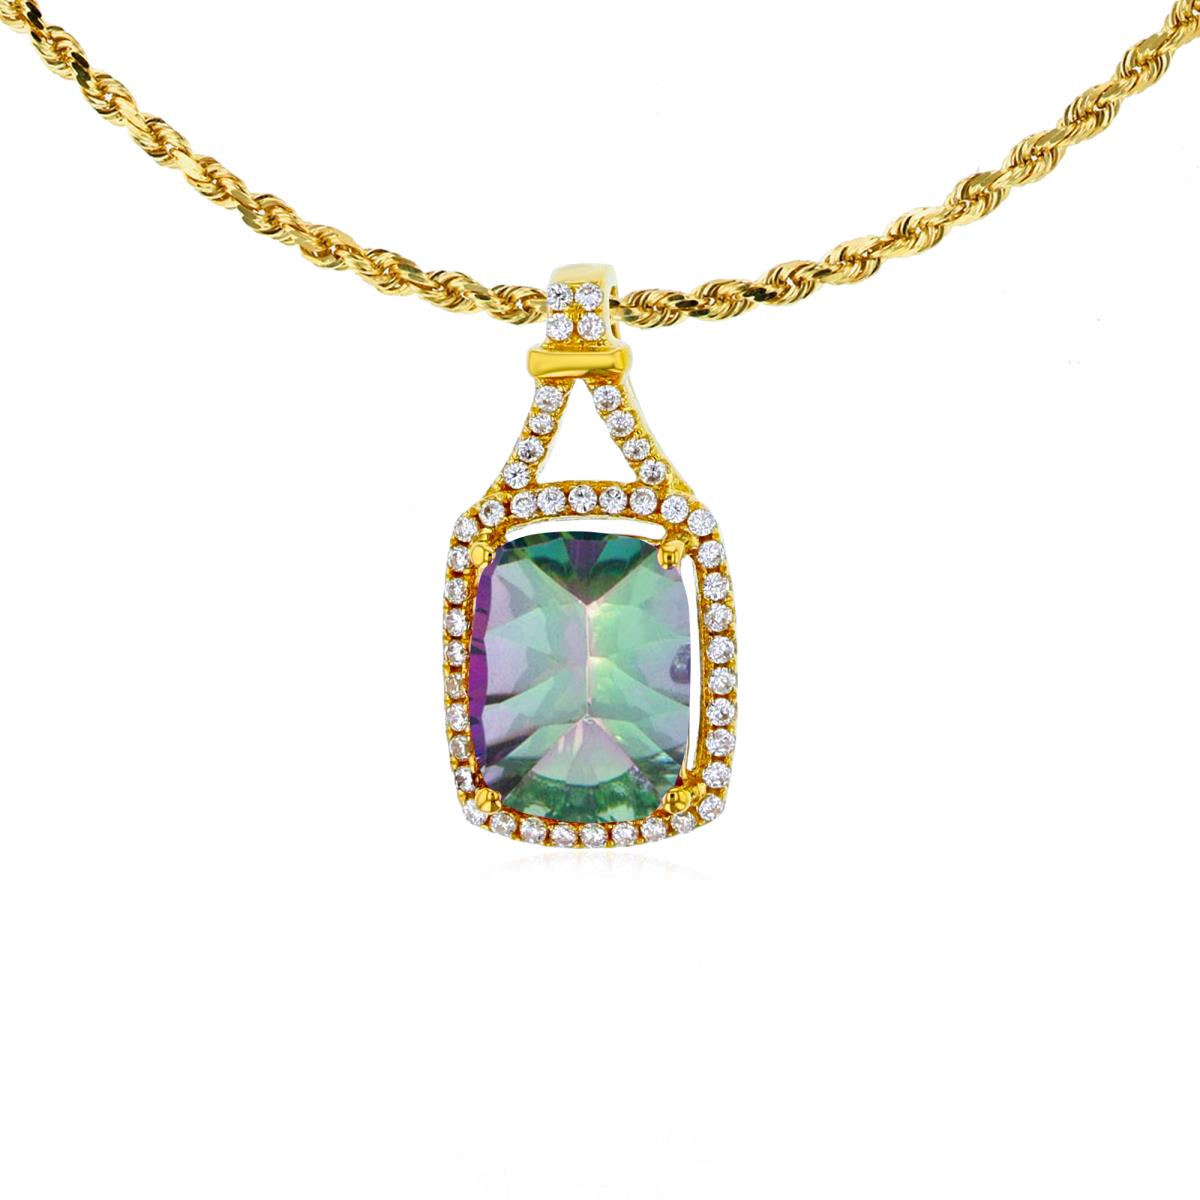 14K Yellow Gold 8x6mm Cushion Mystic Green Topaz & 0.13 CTTW Rd Diamonds Halo 18" Rope Chain Necklace